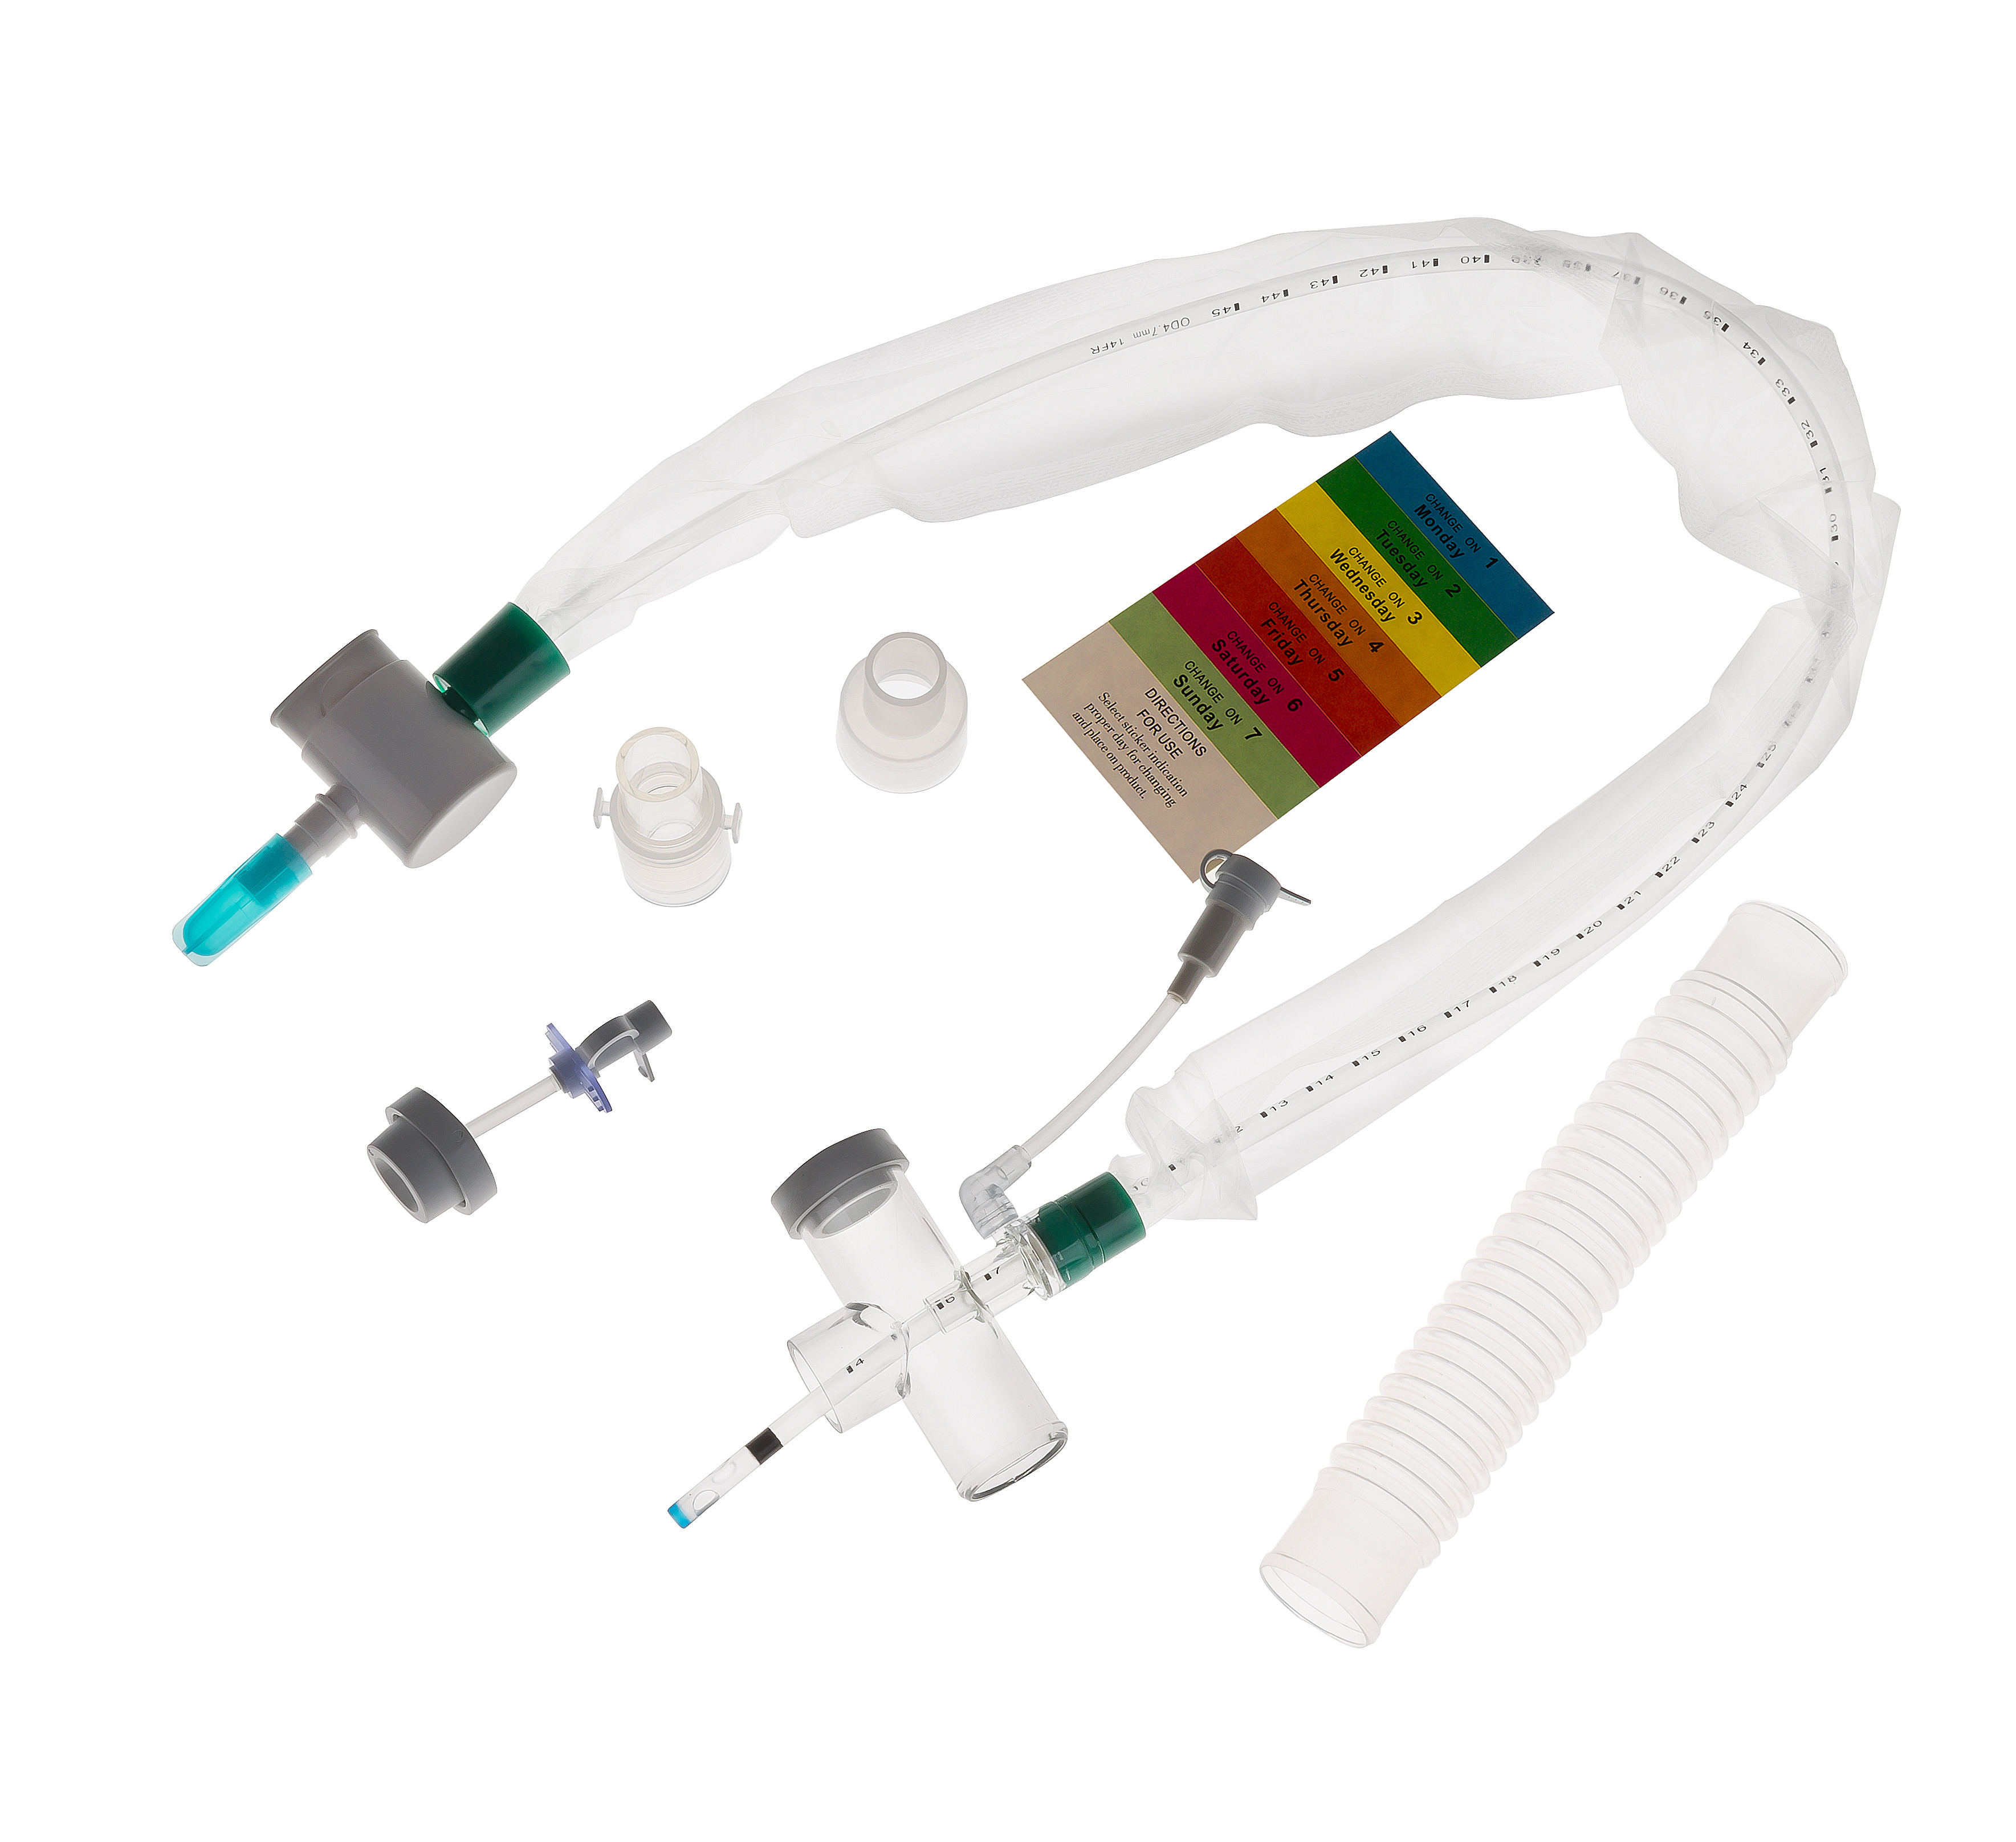  10Fr Medical Grade PVC Suction Catheter For Airway Management Manufactures